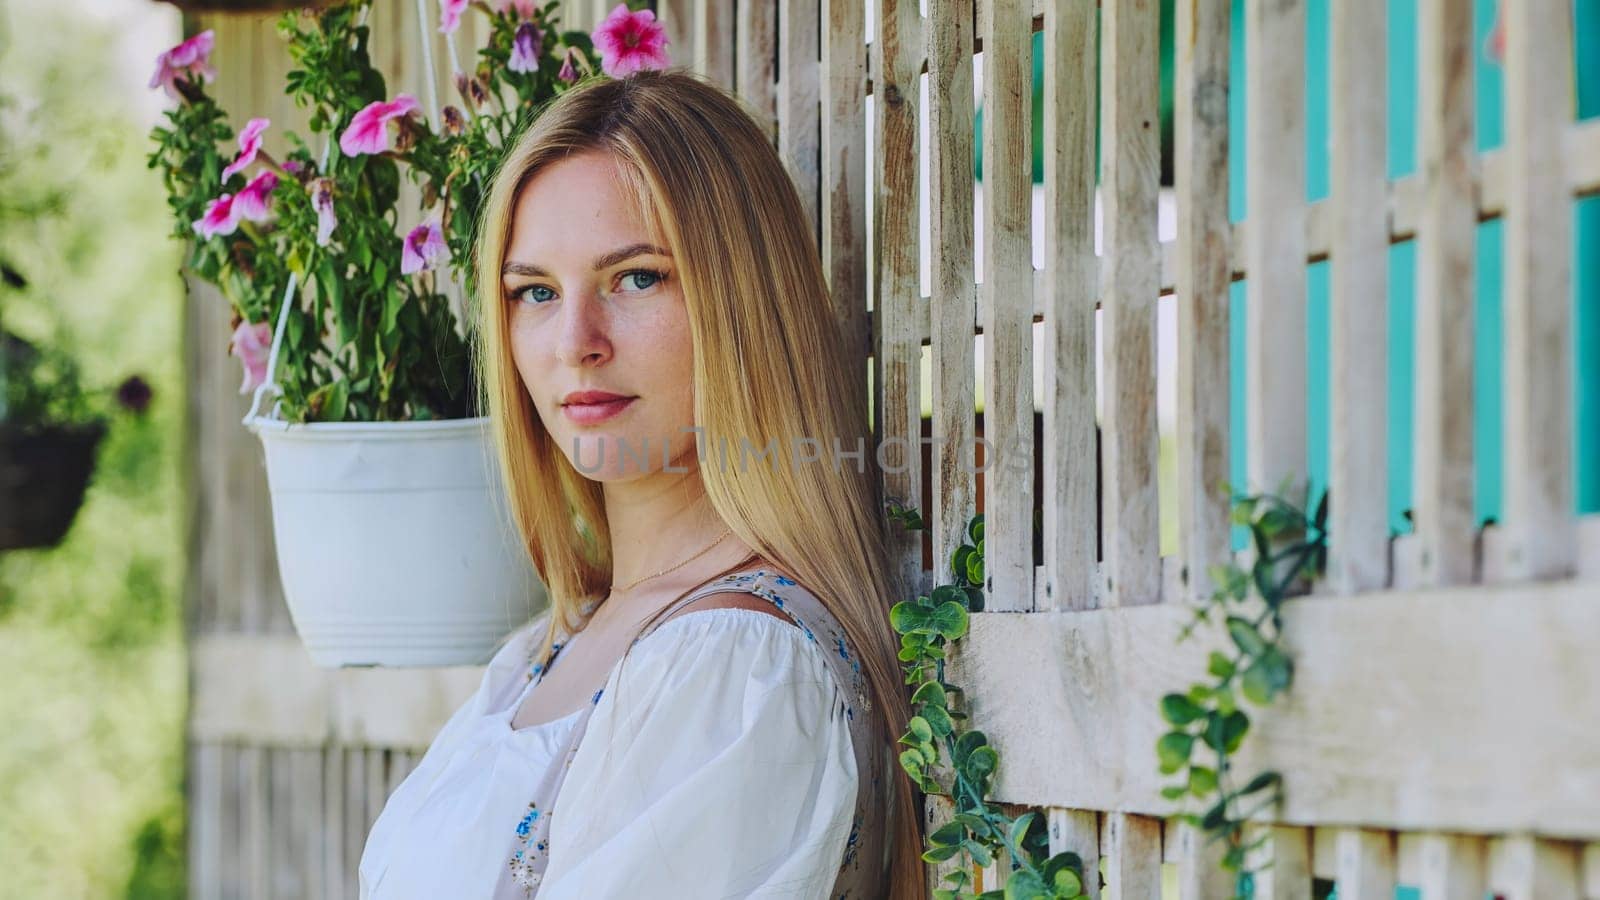 A girl of Slavic appearance poses at home with flowers